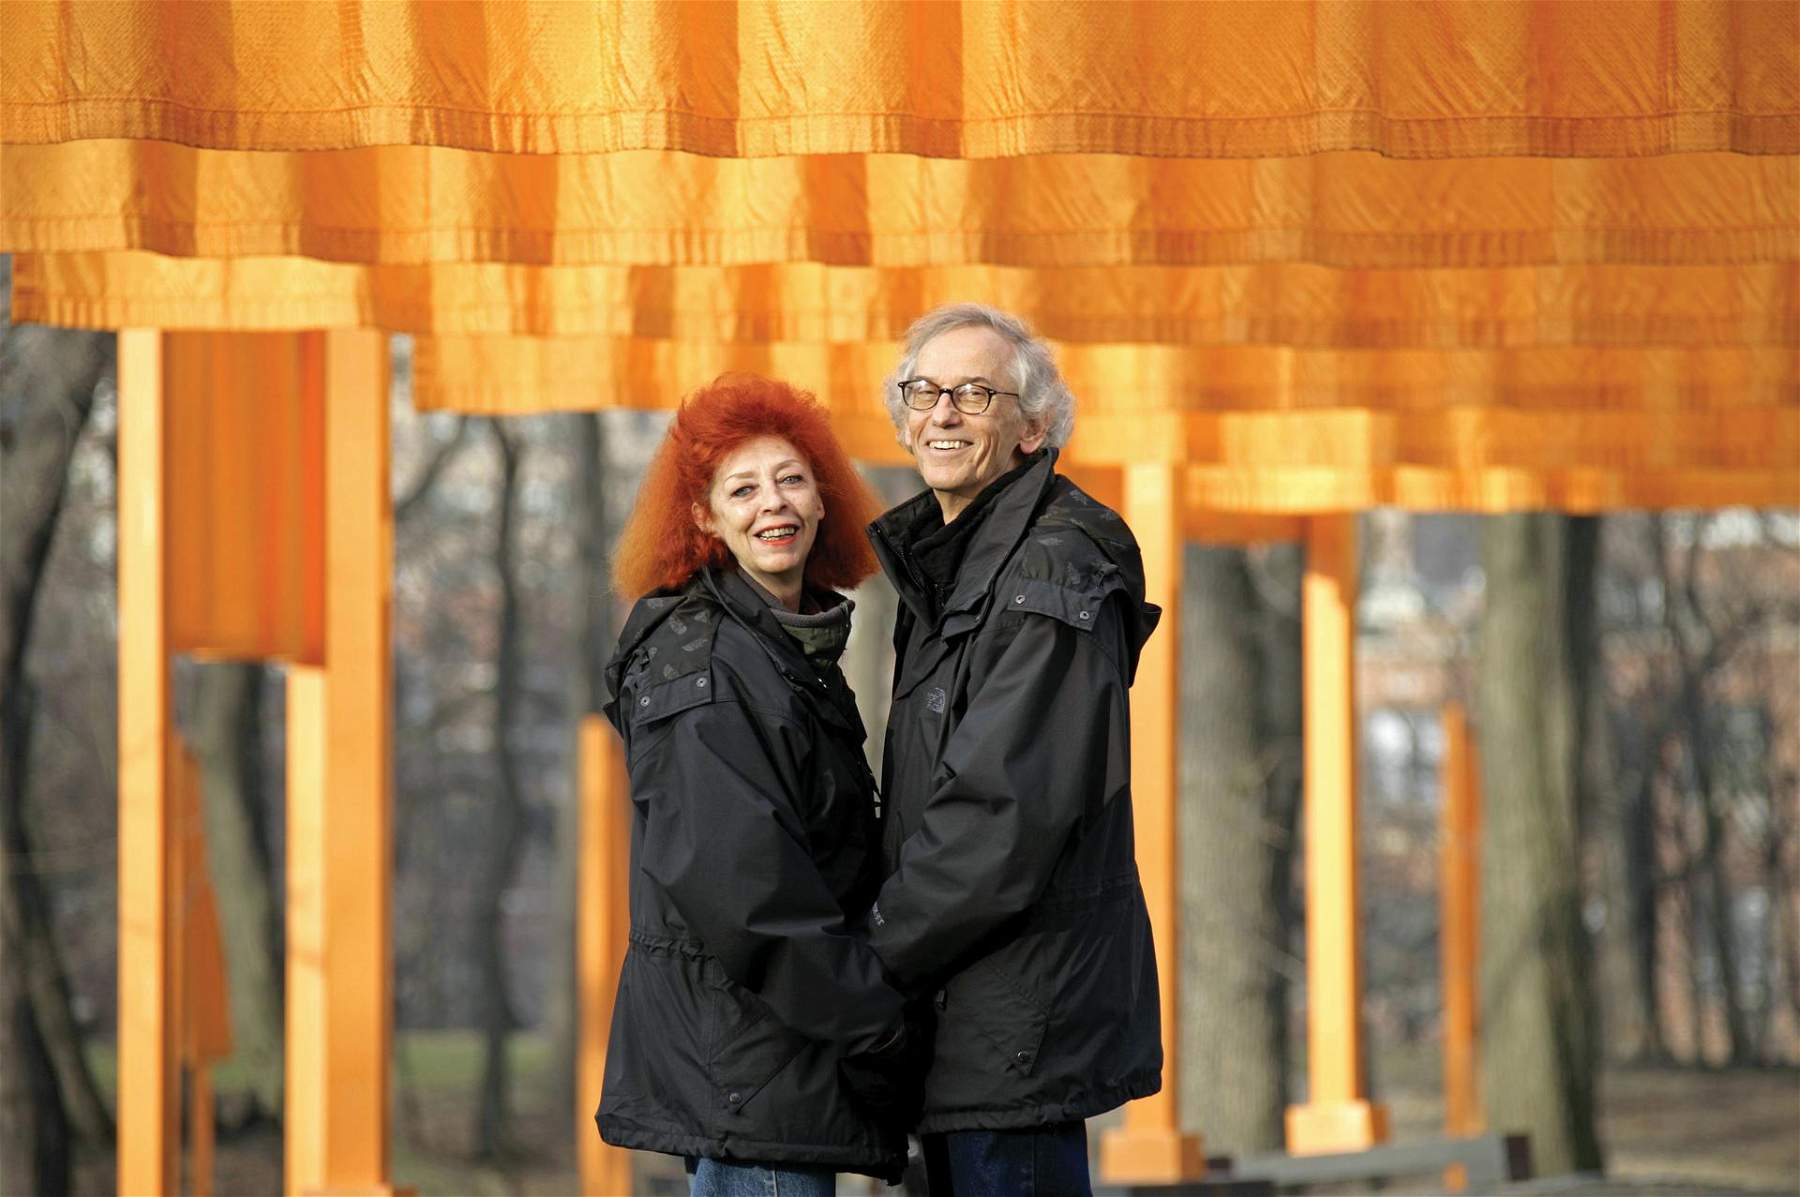 Turin, an exhibition on Christo and Jeanne-Claude's projects at Miradolo Castle